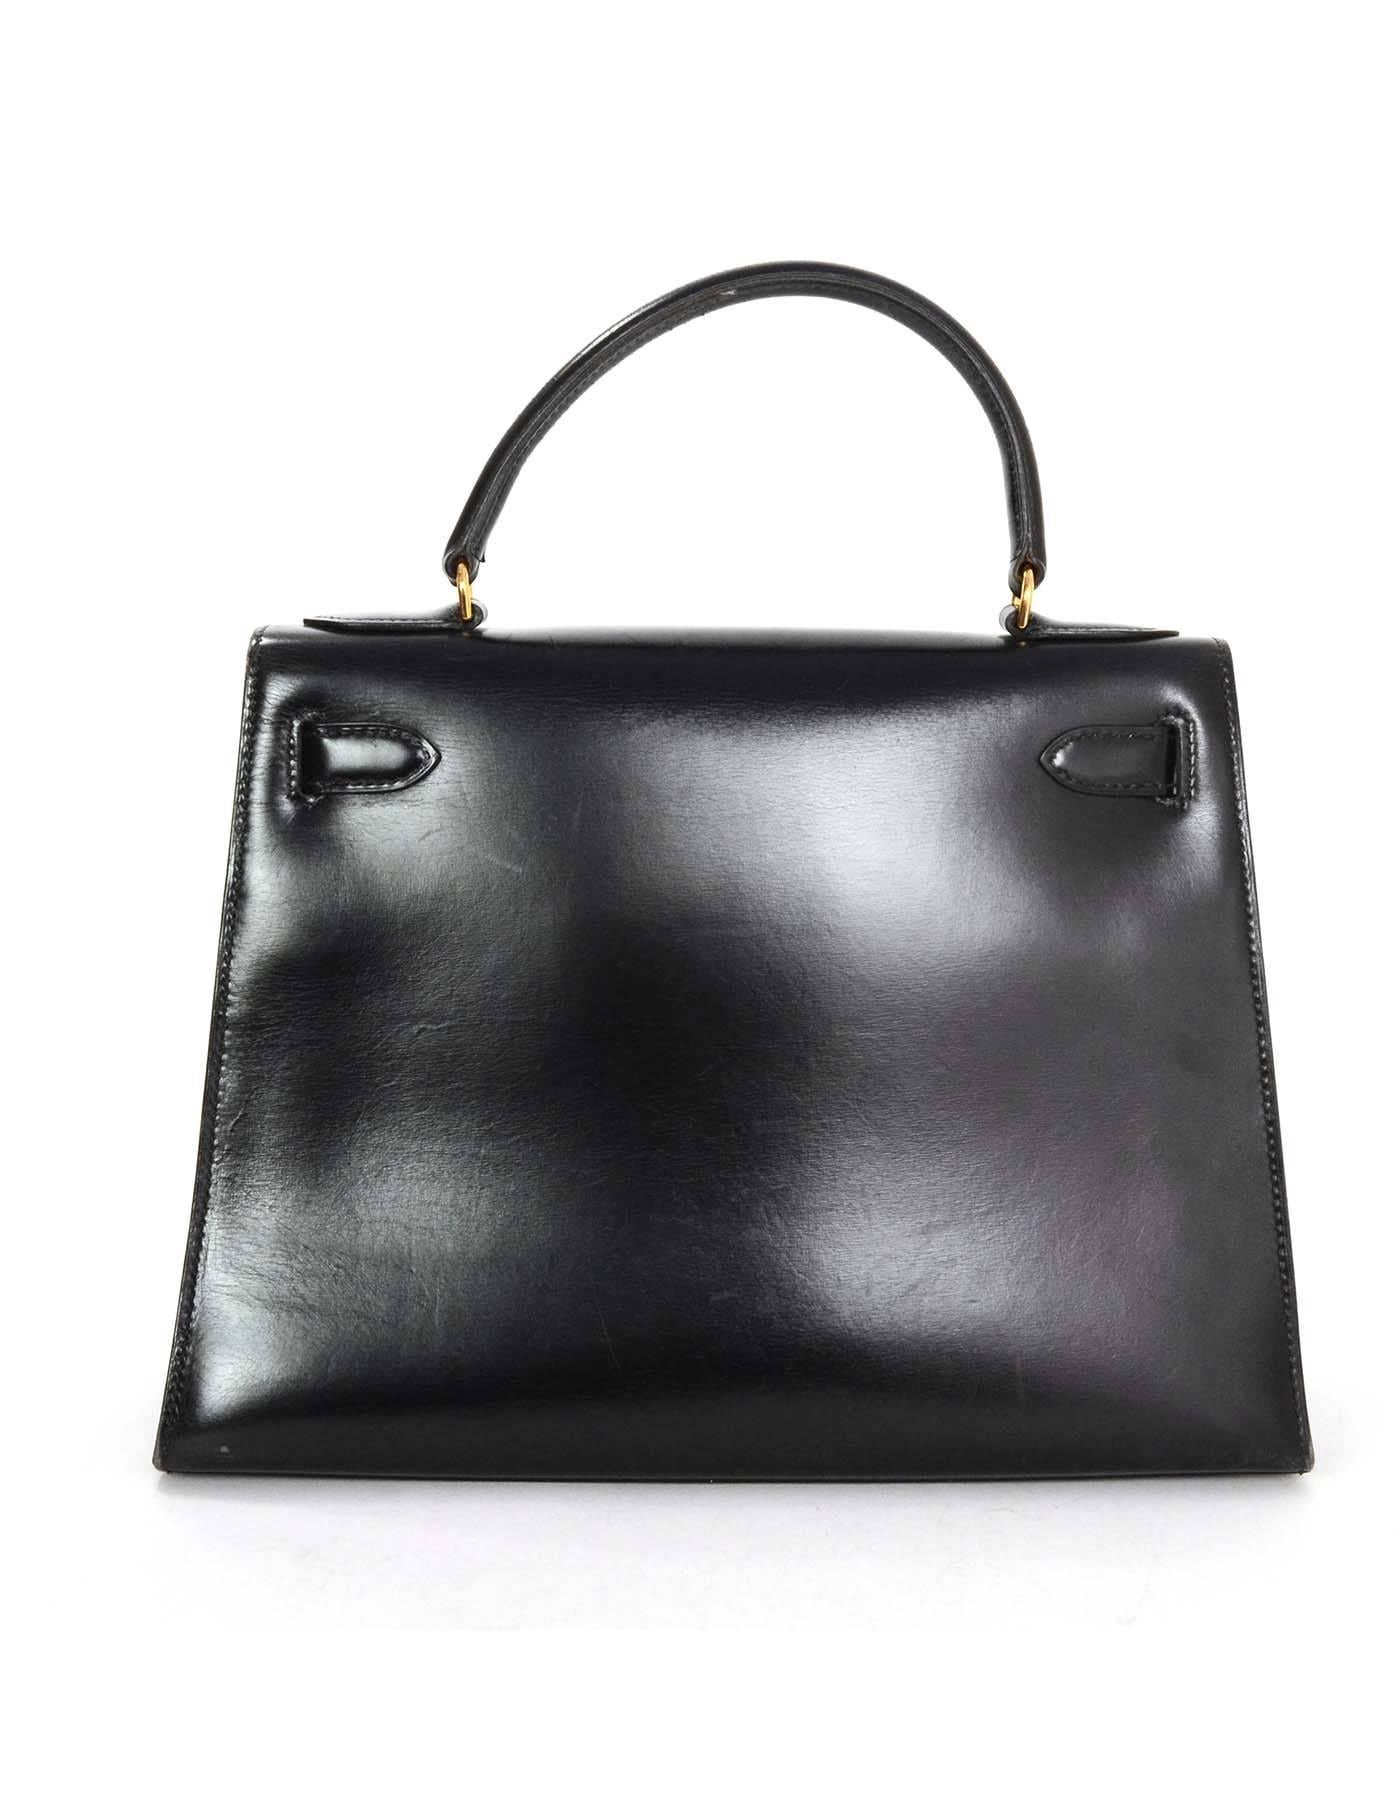 Hermes Black Box Rigid Sellier 28cm Kelly Bag
Features non-Hermes removable shoulder/crossbody strap
Made in: France
Year of Production: 1981
Color: Black
Hardware: Goldtone
Materials: Box leather
Lining: Black chevre